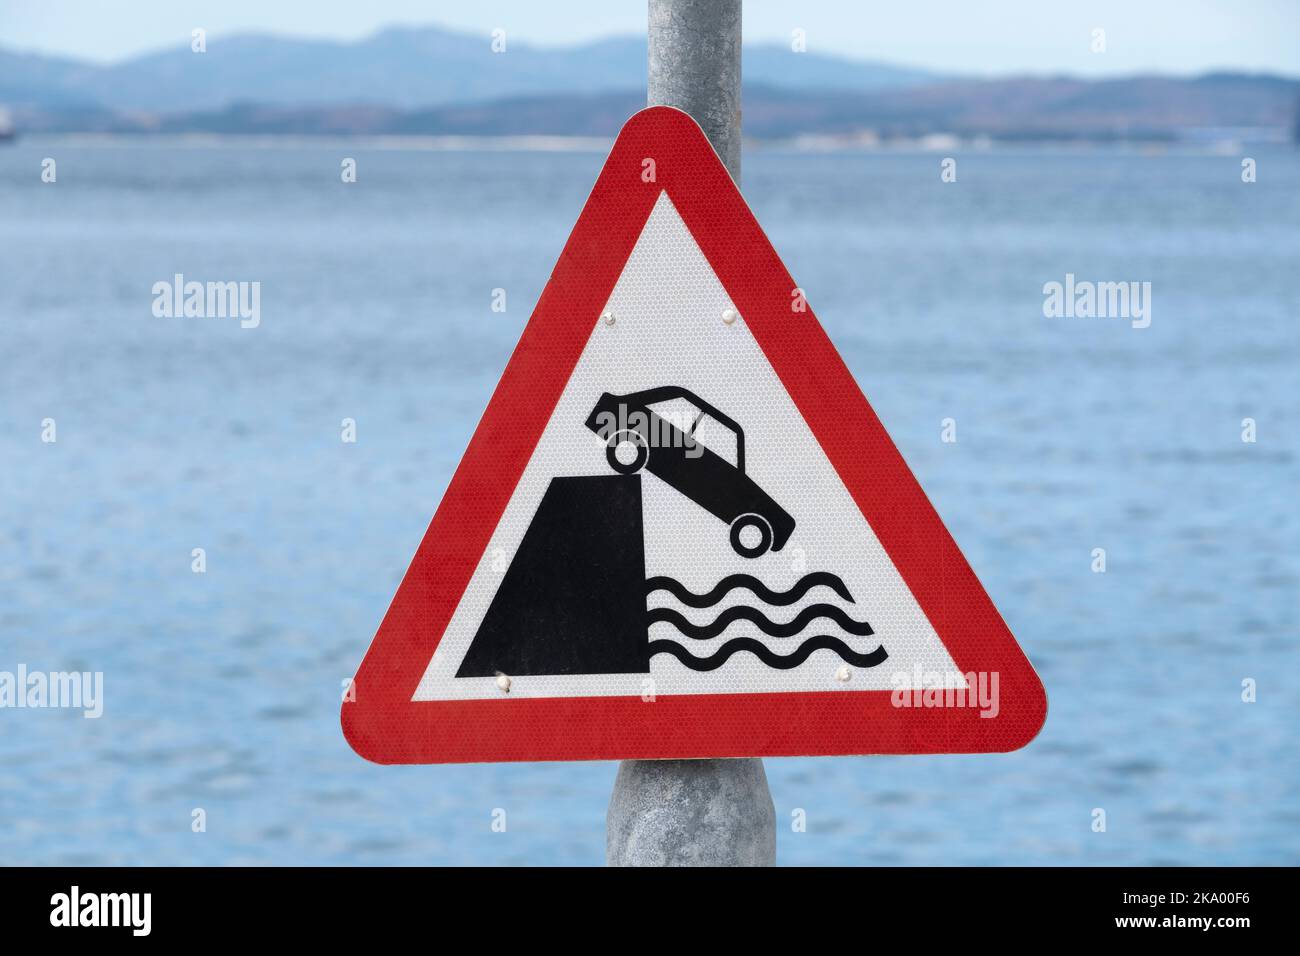 Red triangle warning sign making drivers aware that vehicle could fall into deep water. Stock Photo